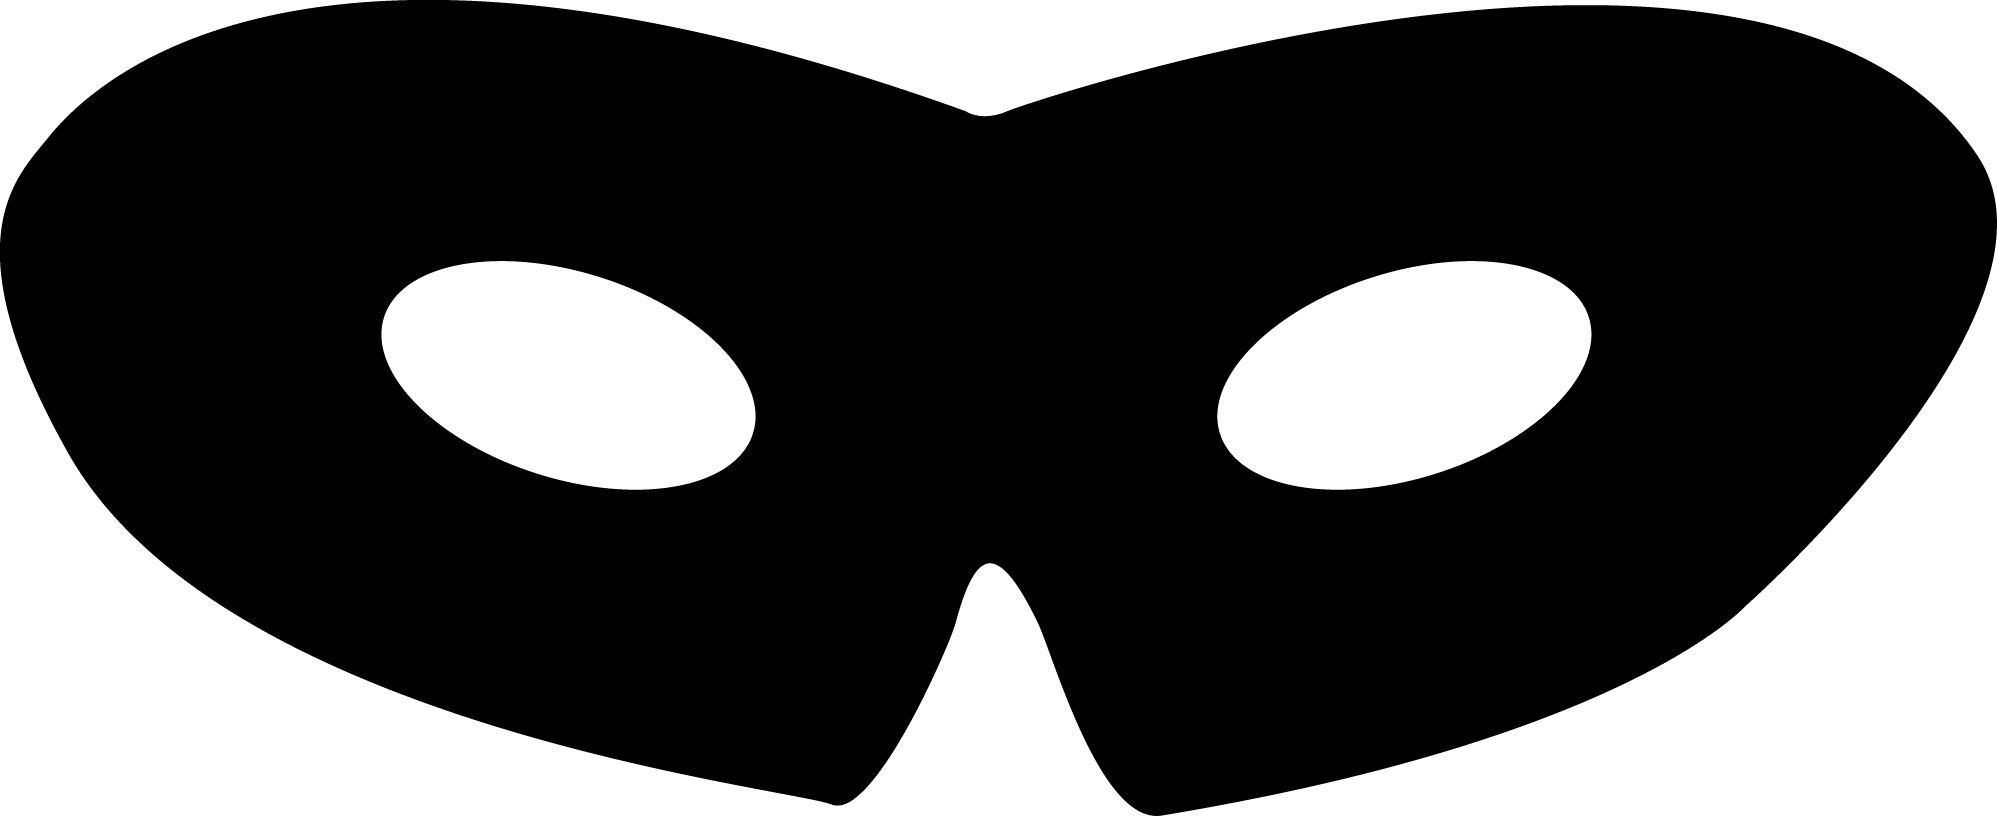 Bandit mask and eyes clipart 